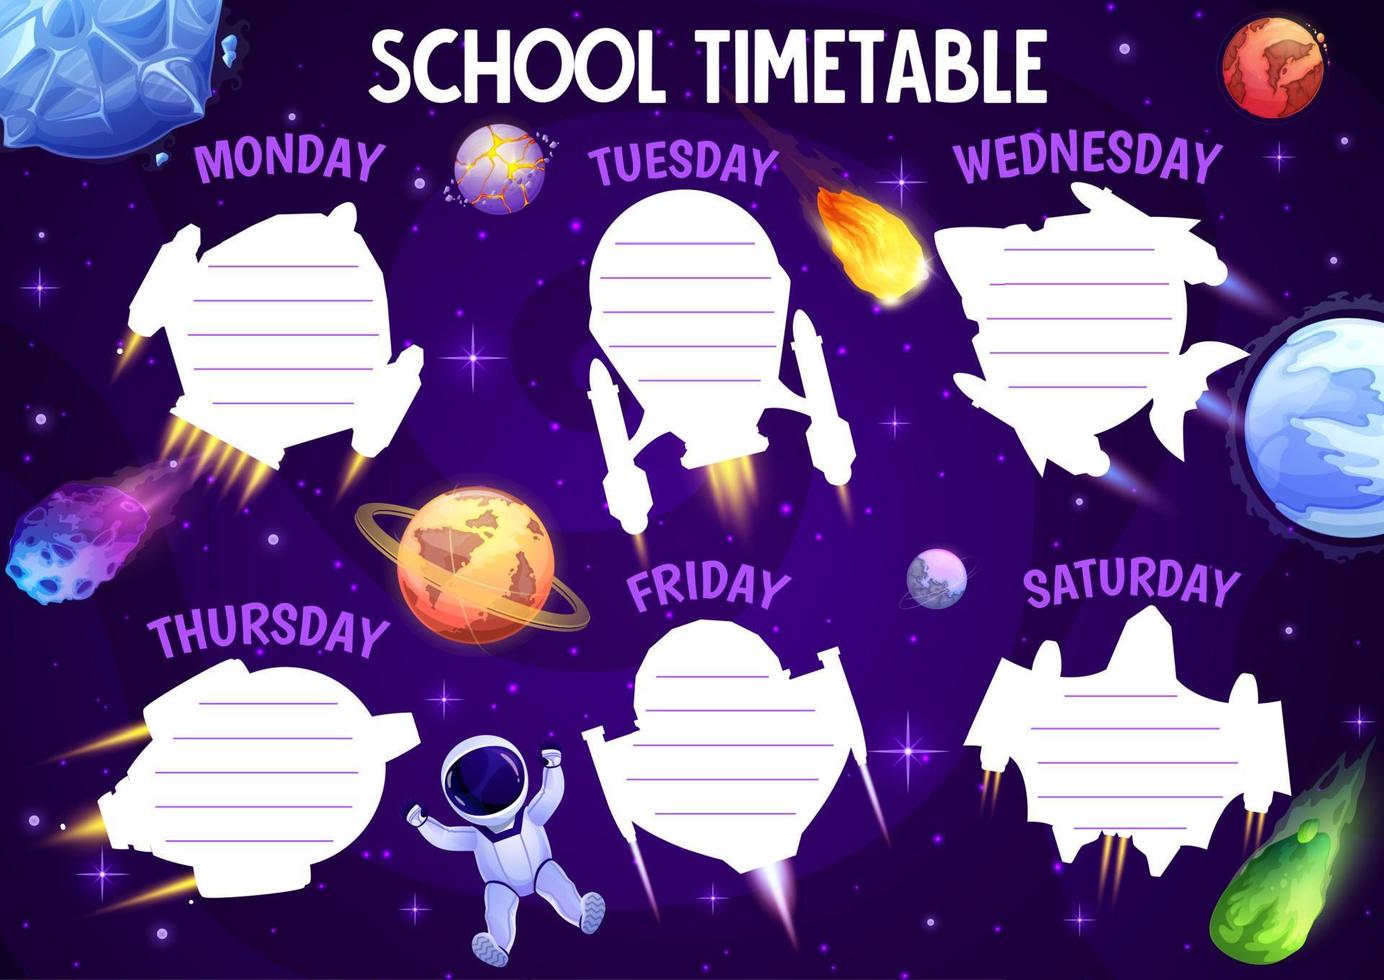 Timetable schedule cartoon space comets, asteroids vector